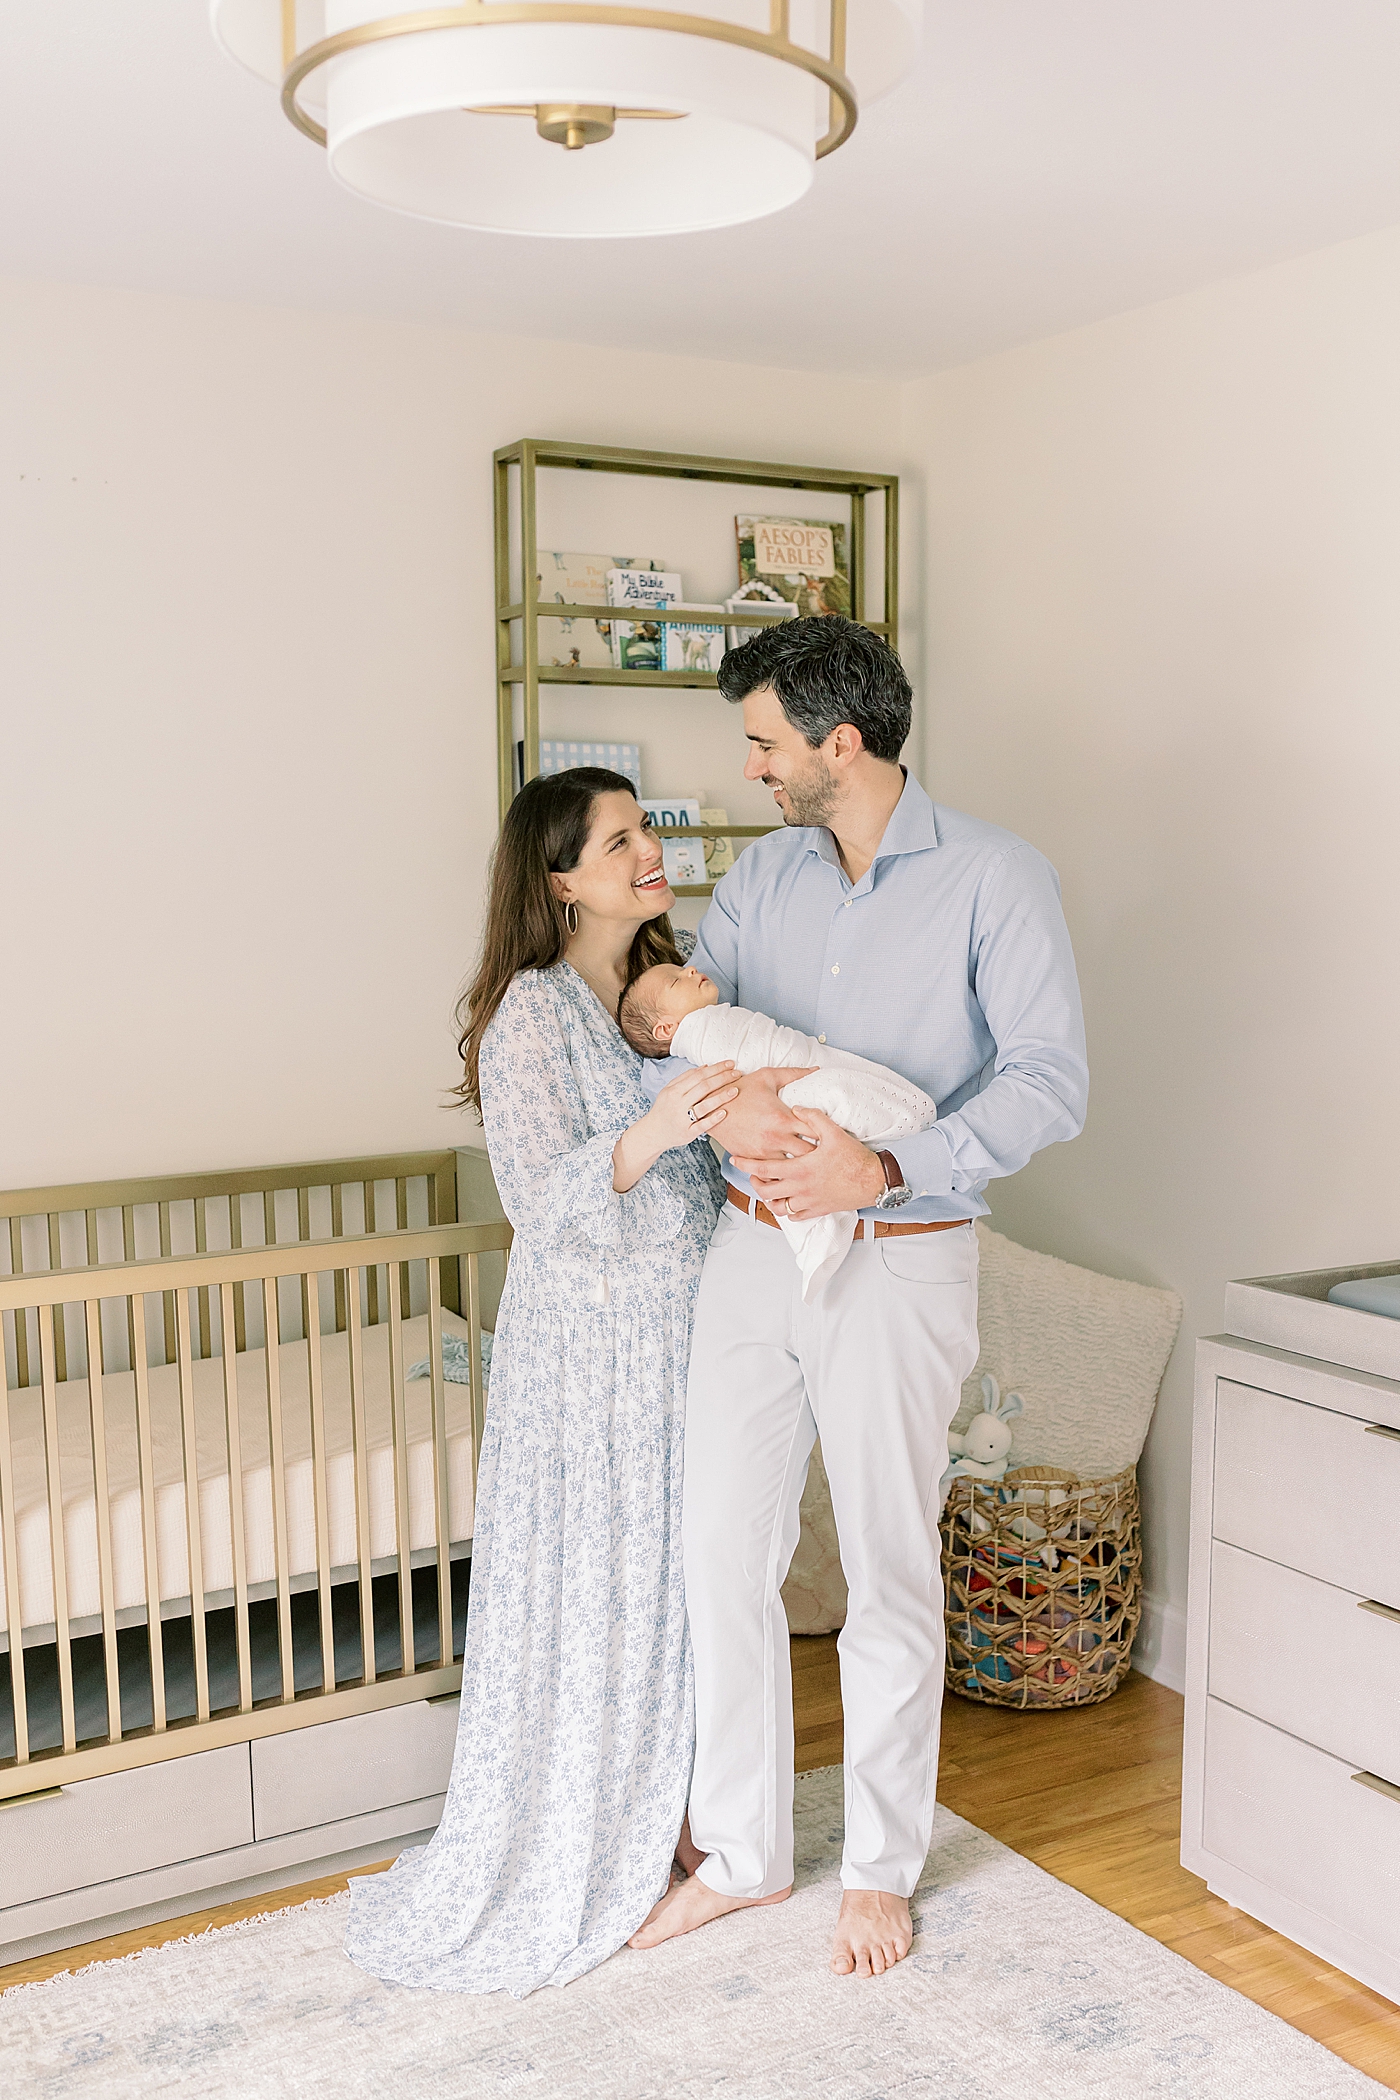 Mom and dad smiling holding their new baby in the nursery | Photo by Mount Pleasant Newborn Photographer Caitlyn Motycka